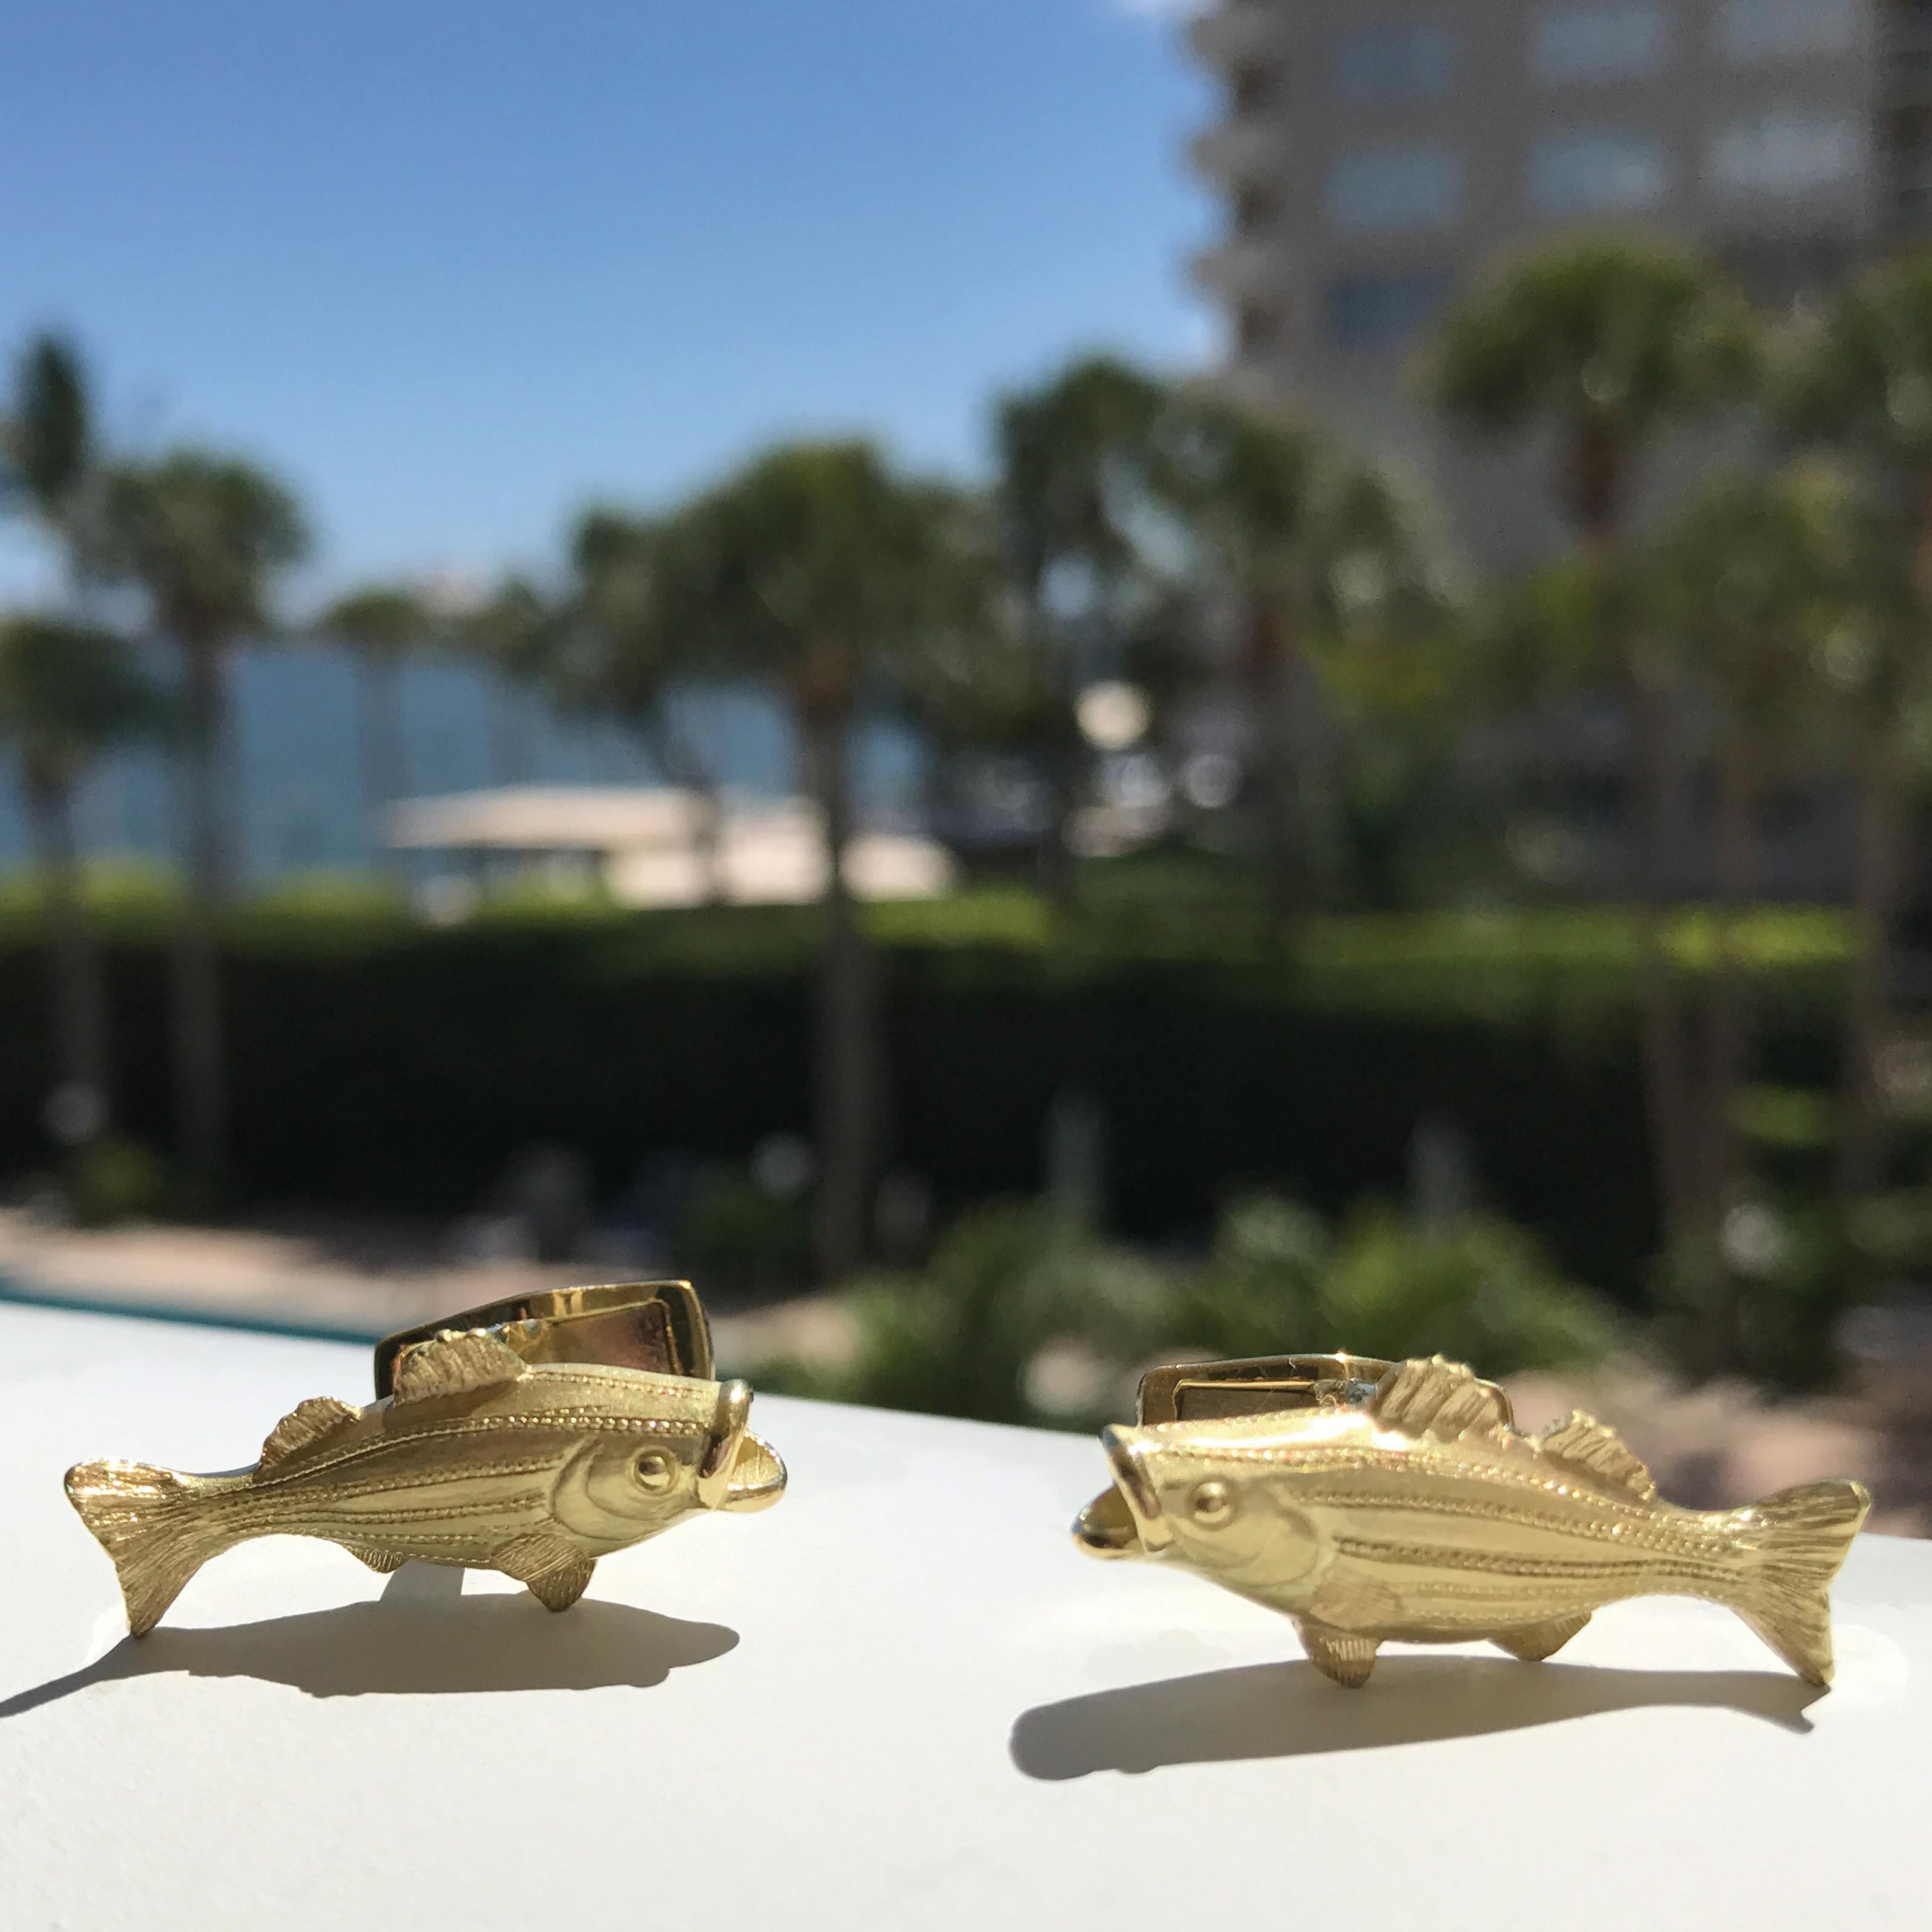 The Bass are running! These 18kt Gold Striped Bass Cufflinks are beautifully designed by Susan Lister Locke to add striking elegance to any man's outfit, easily going from business meeting to social engagement.